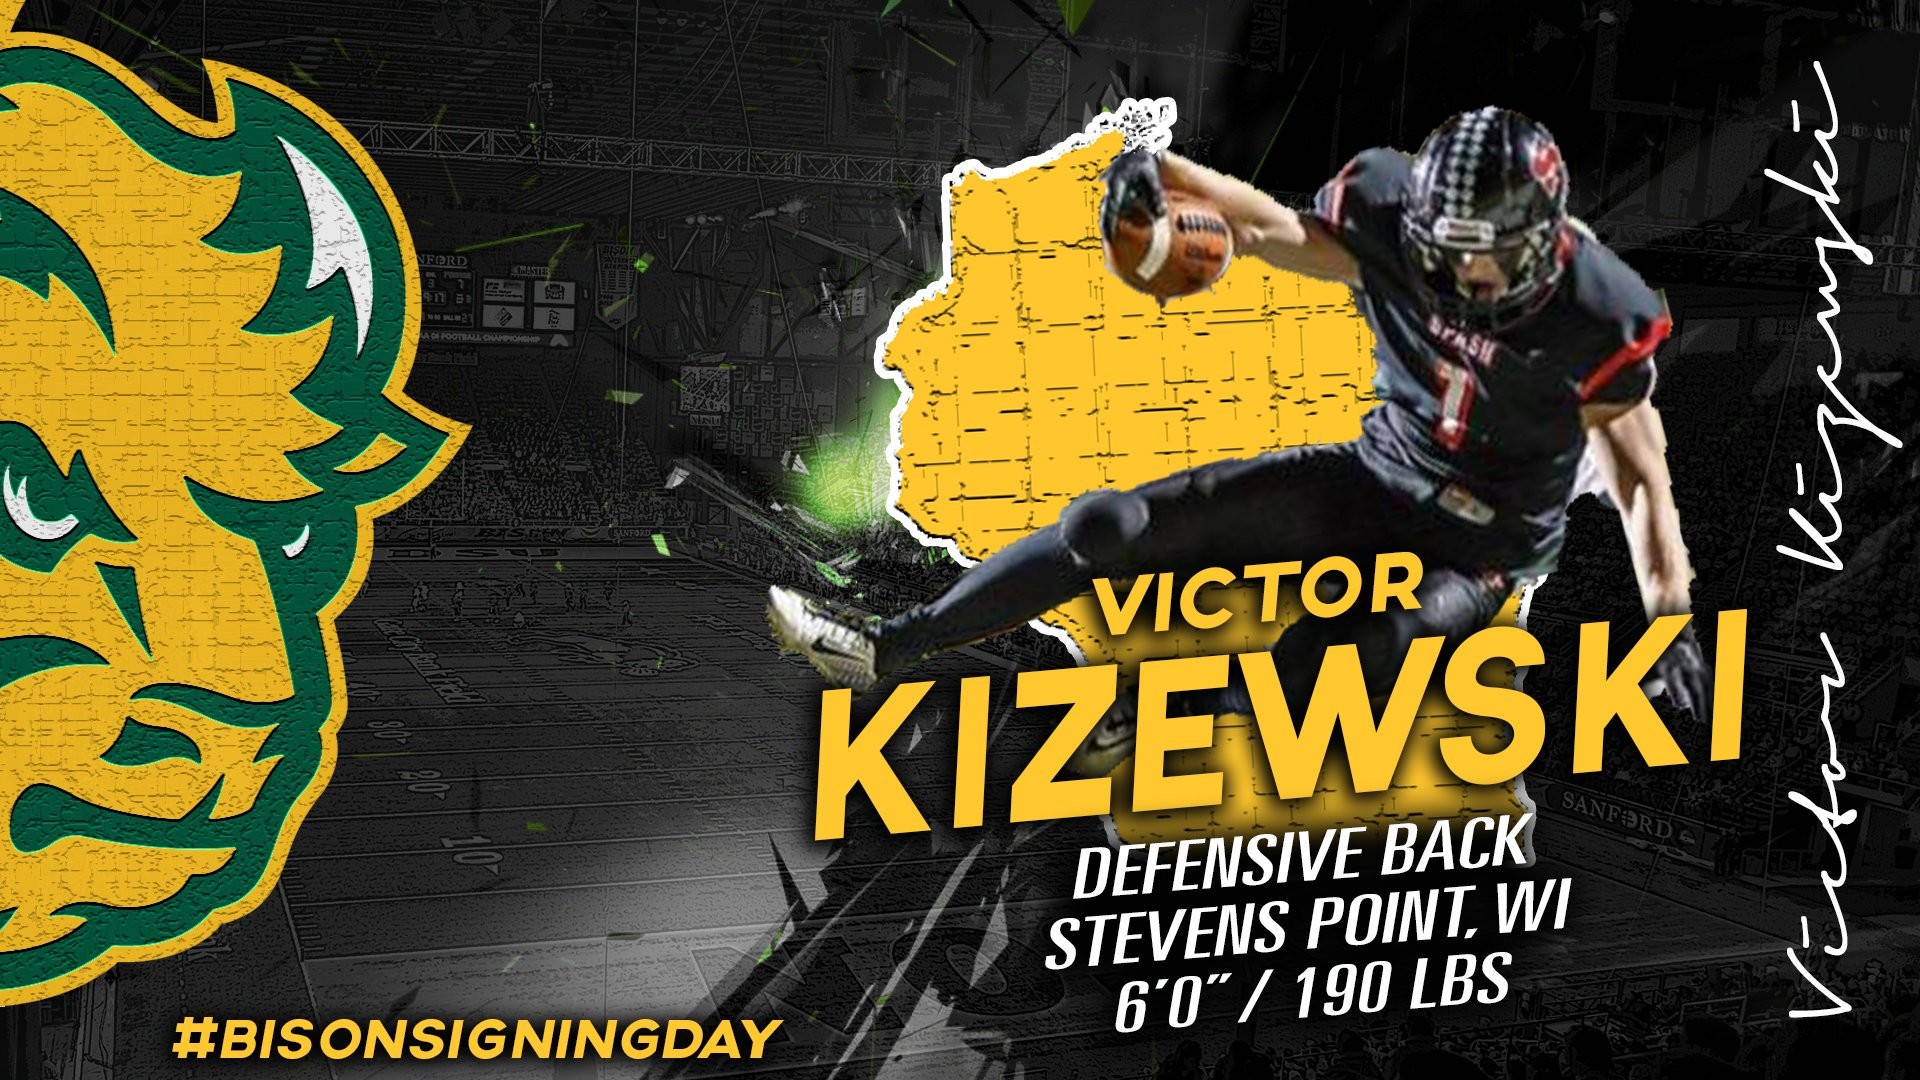 1920x1080 NDSU Football on Twitter: "Another defensive back joins the Herd: Victor  Kizewski from Stevens Point, WI #BisonSigningDay16 https://t.co/1zFWZvH2P0"